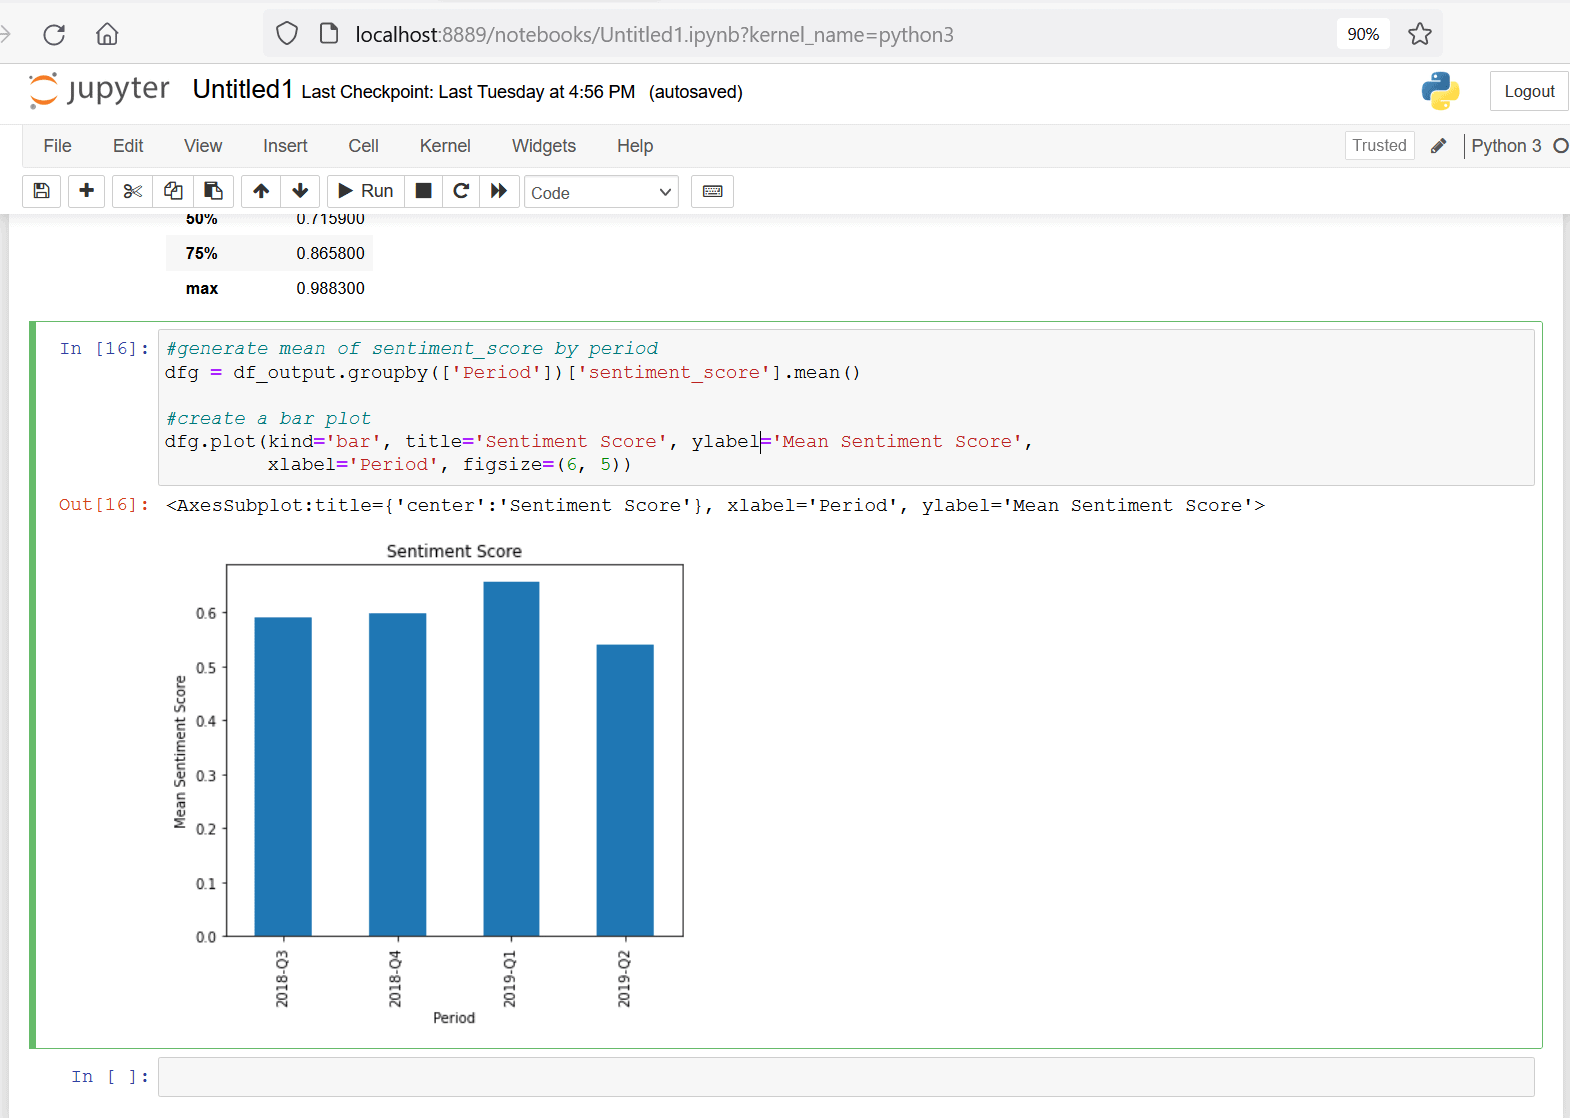 An image showing the code for a chart, period X mean sentiment score. 